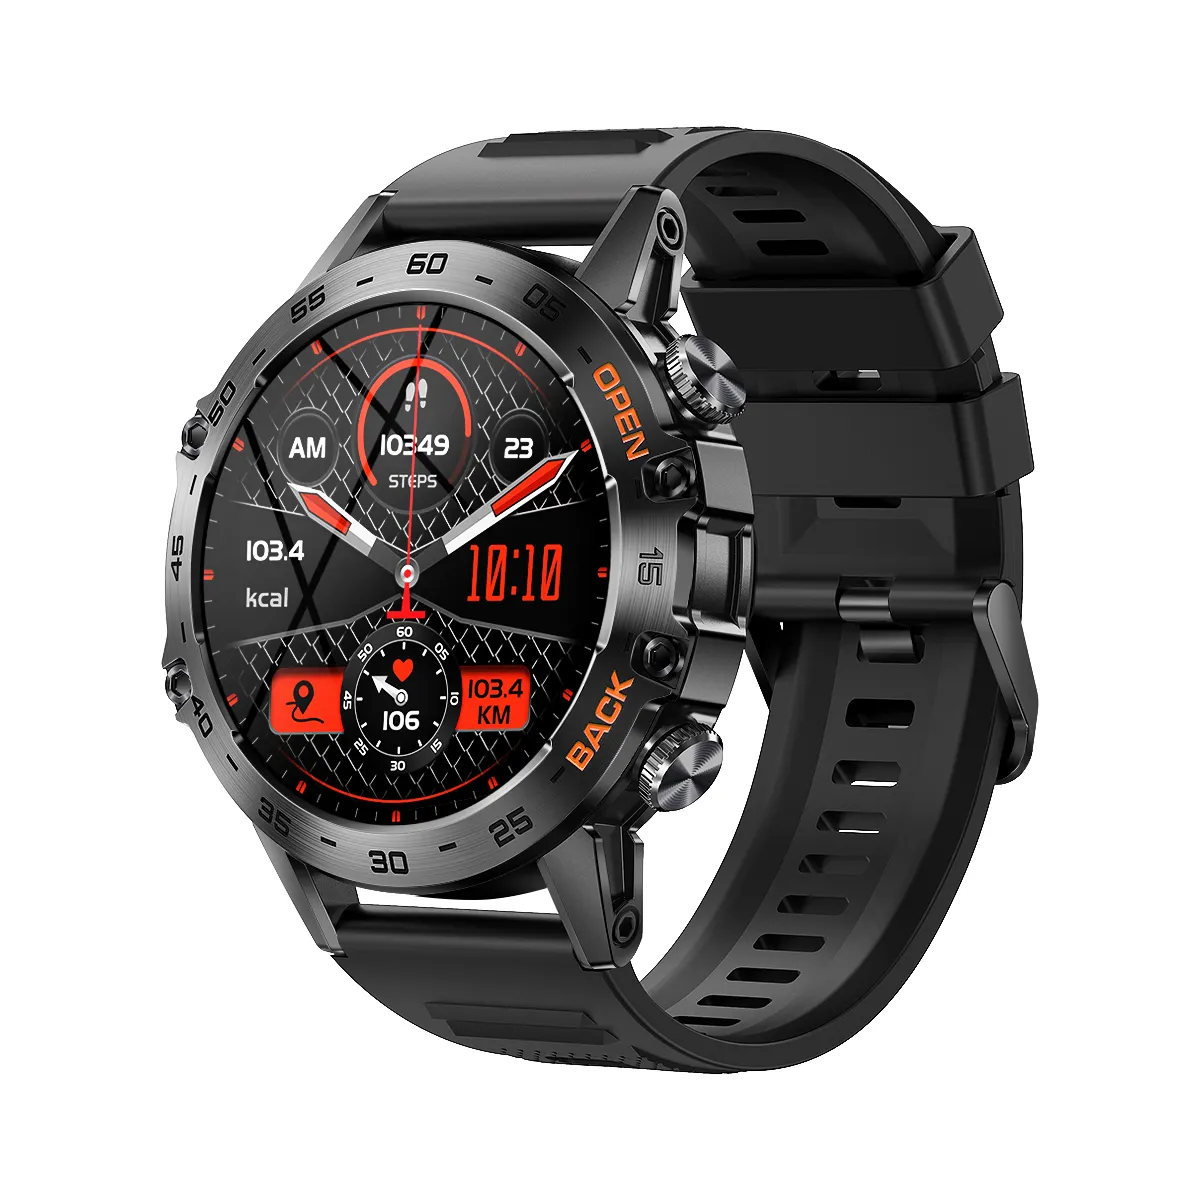 Steel 1.39" Bluetooth Call Smart Watch Men Sports Fitness Tracker Watches IP67 Waterproof Smartwatch for Android IOS K52